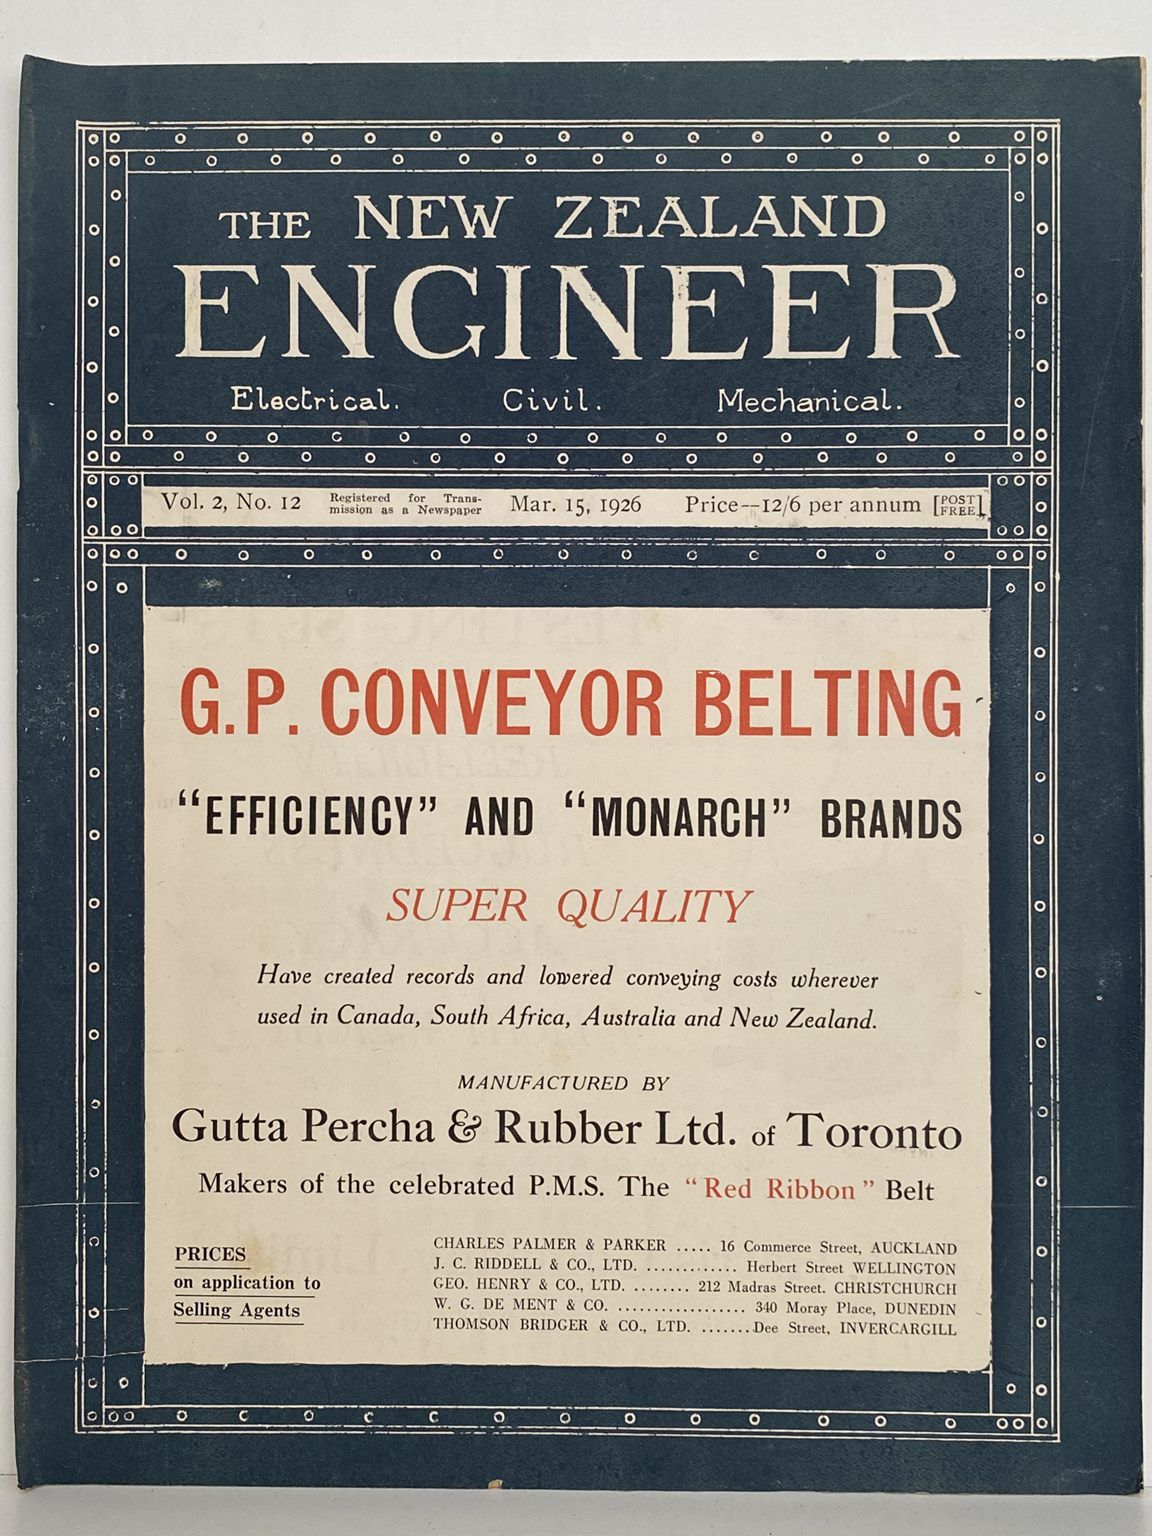 OLD MAGAZINE: The New Zealand Engineer Vol. 2, No. 12 - 15 March 1926